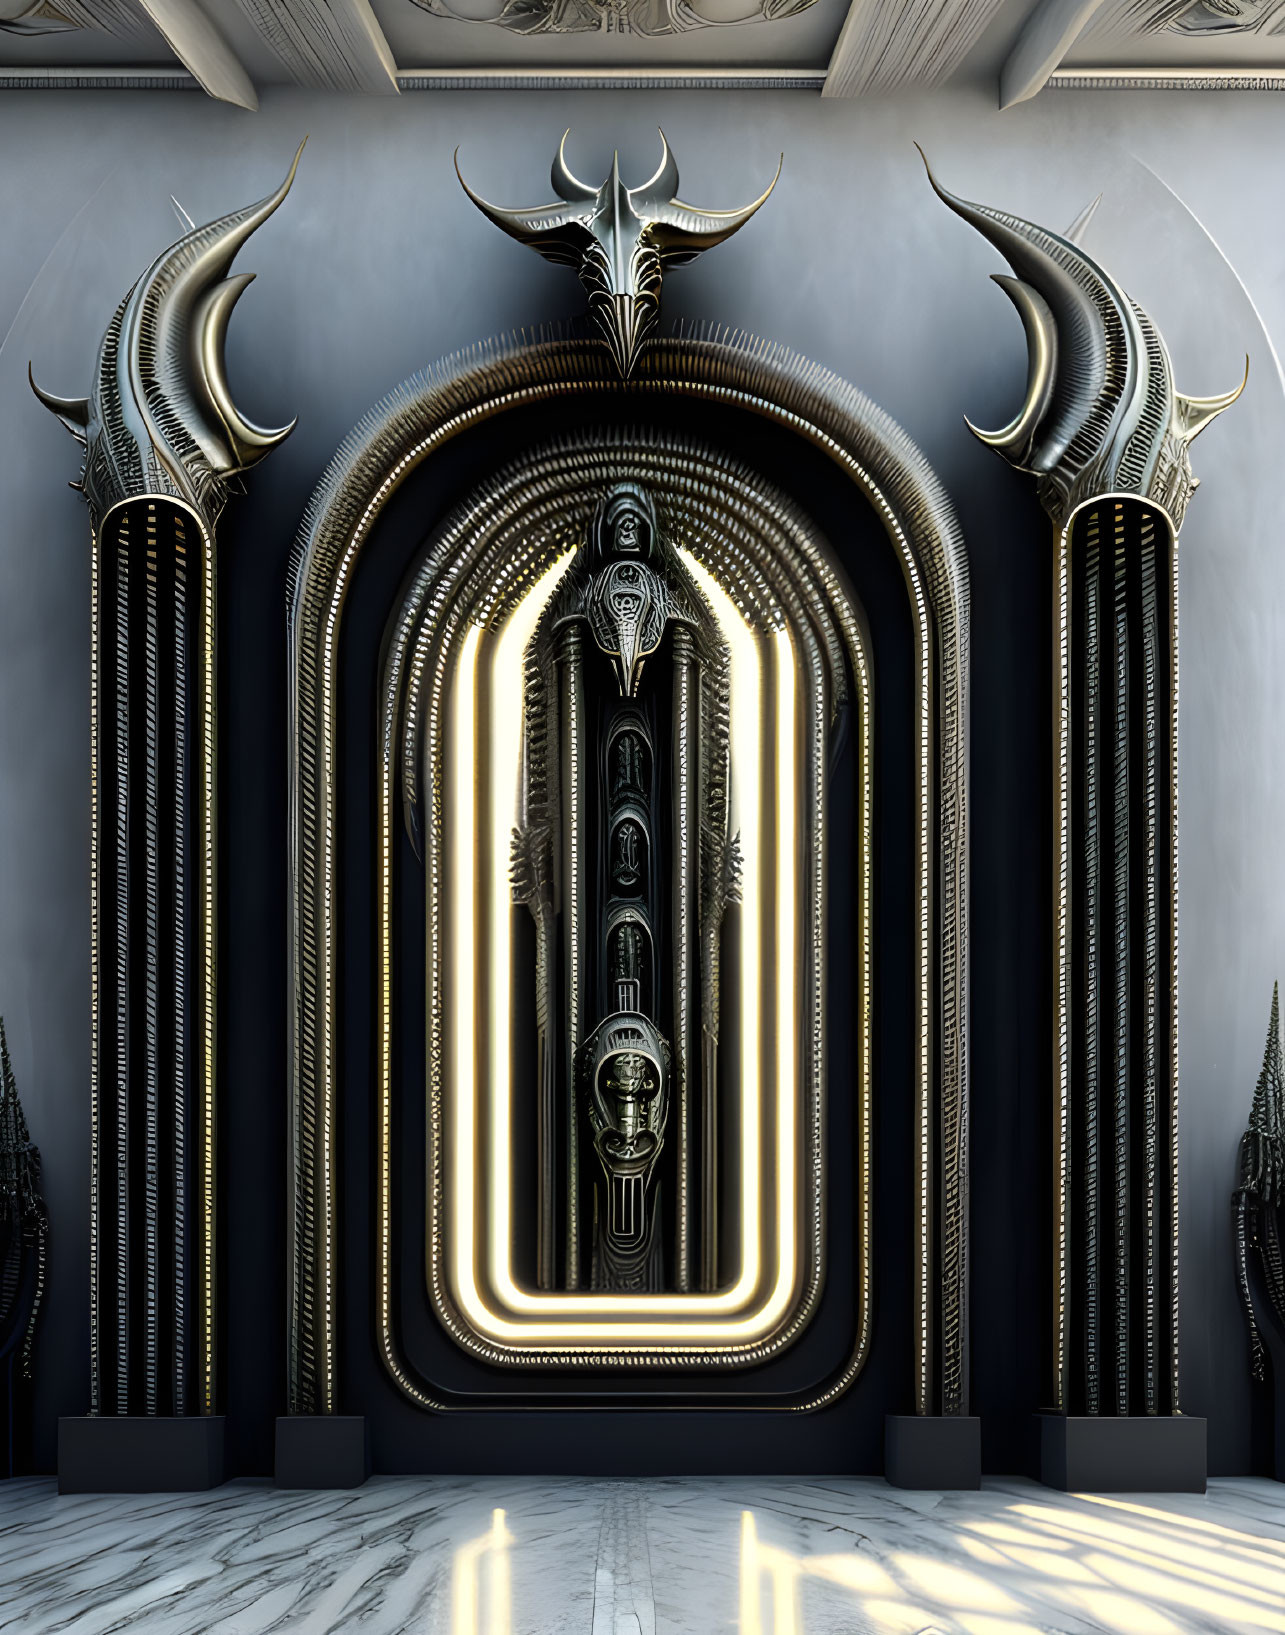 Intricate futuristic door with metallic designs and glowing accents in marble room